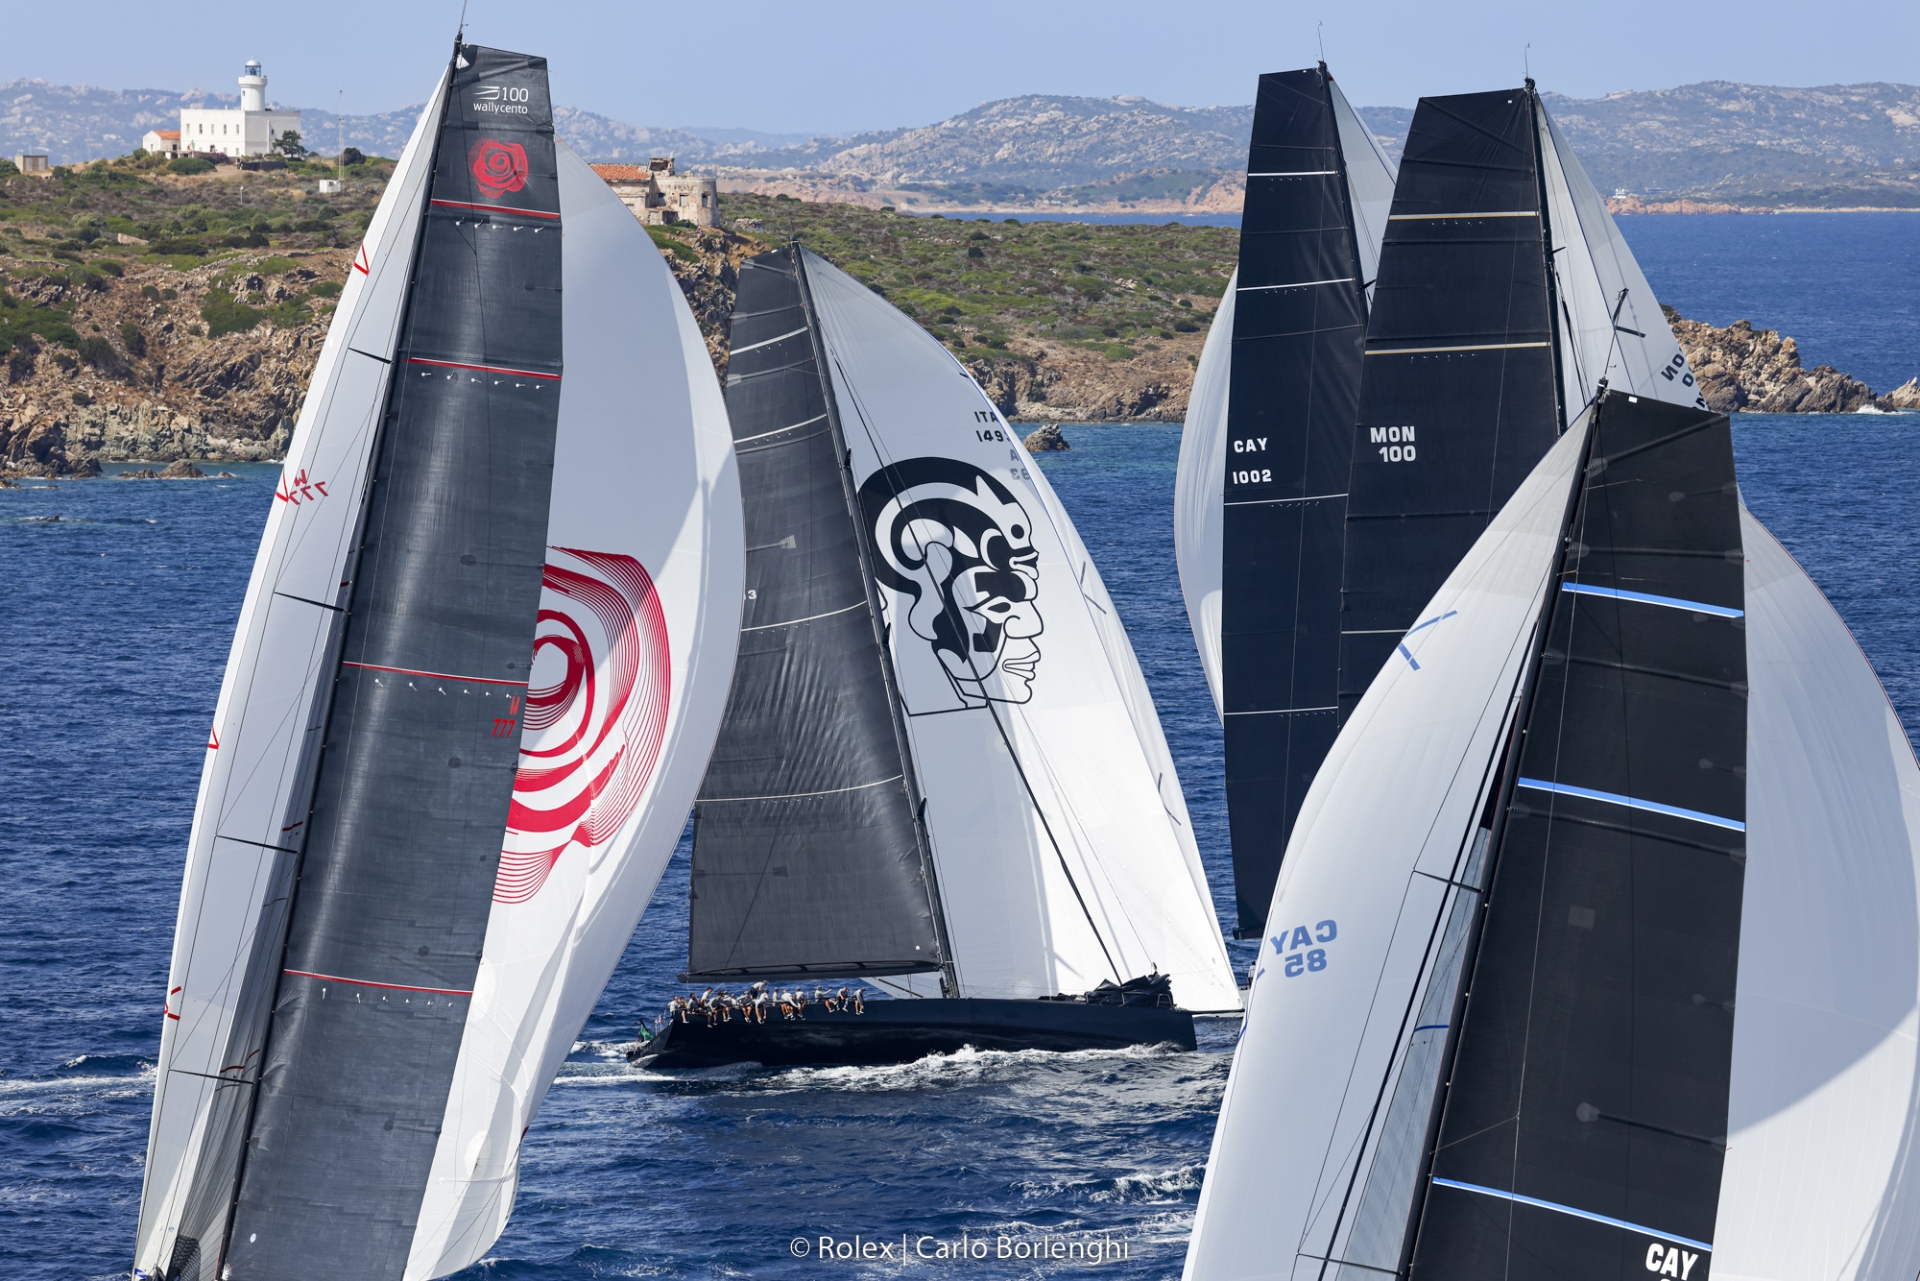 Maxi Yacht Rolex Cup: top-notch sailing continues on Day 2 - News - Yacht Club Costa Smeralda